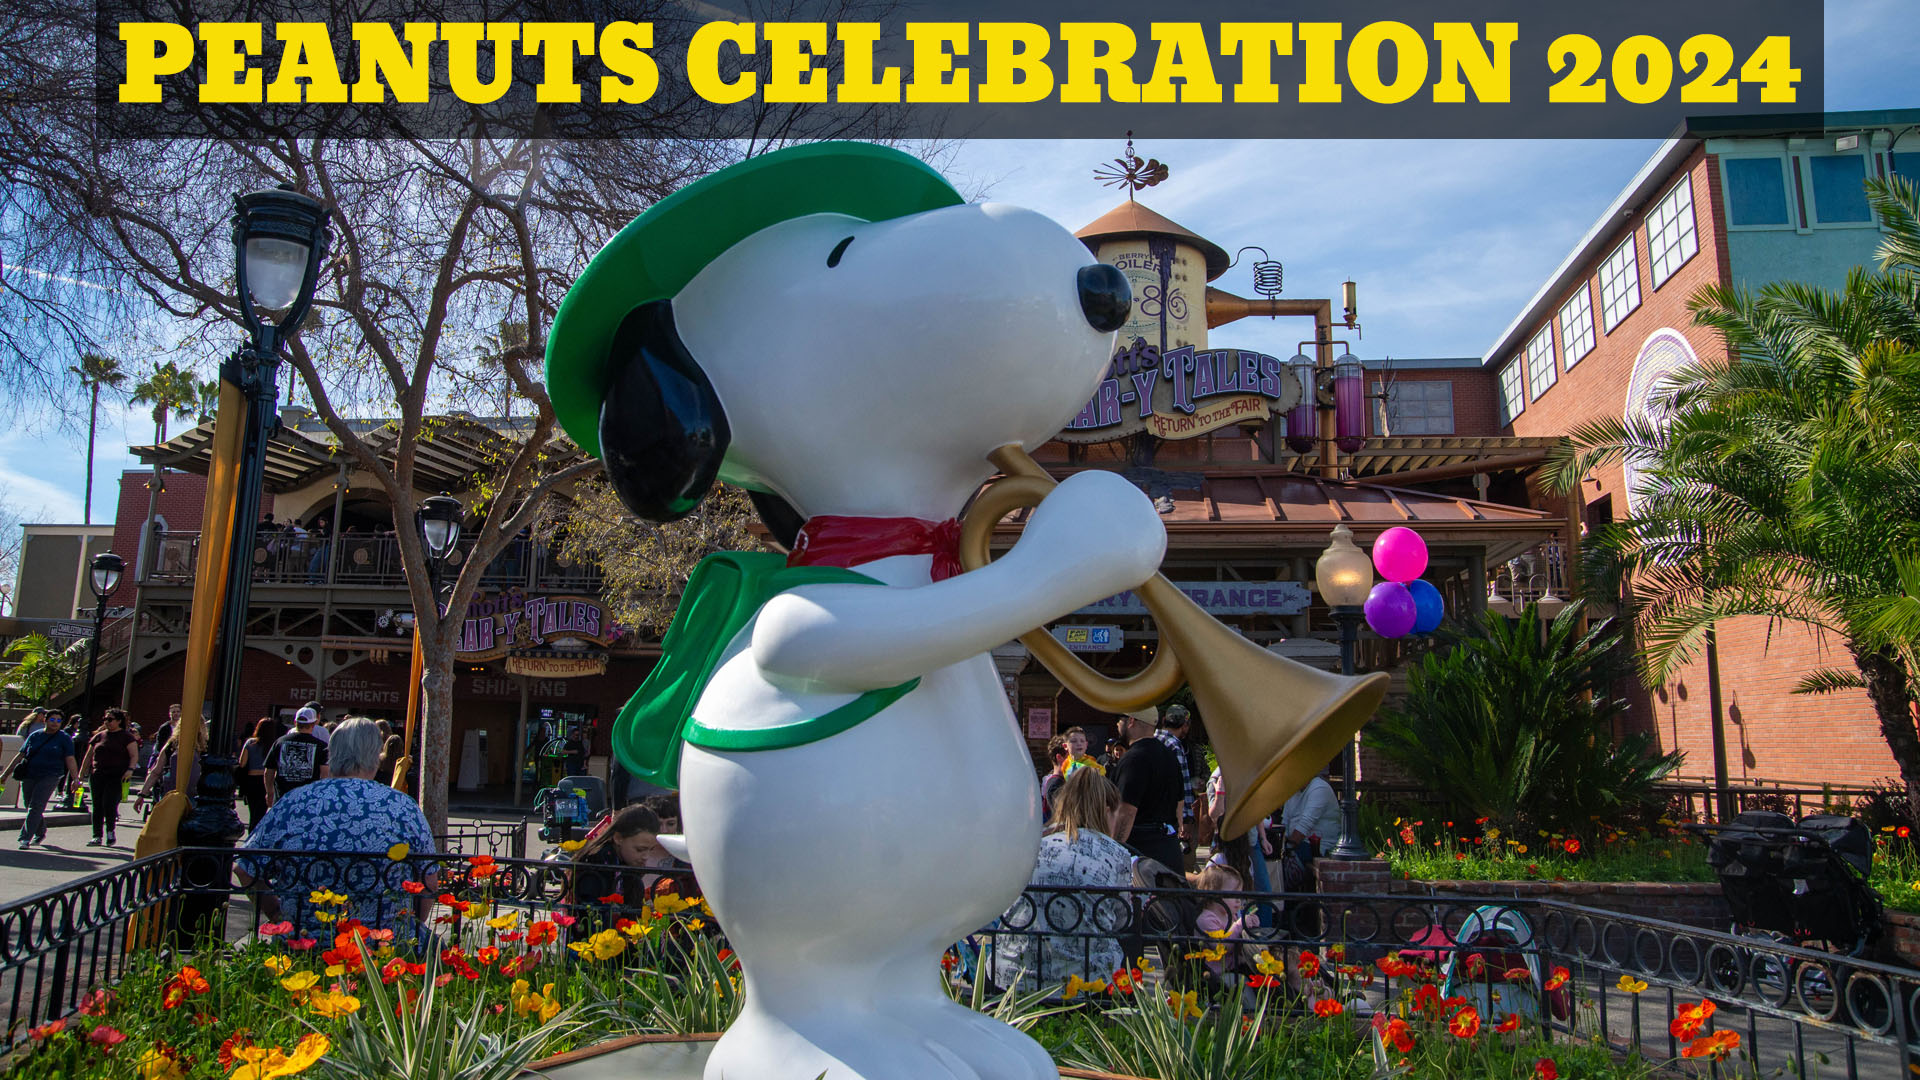 Peanuts Celebration at Knott’s Offers Energetic Family Fun for 2024